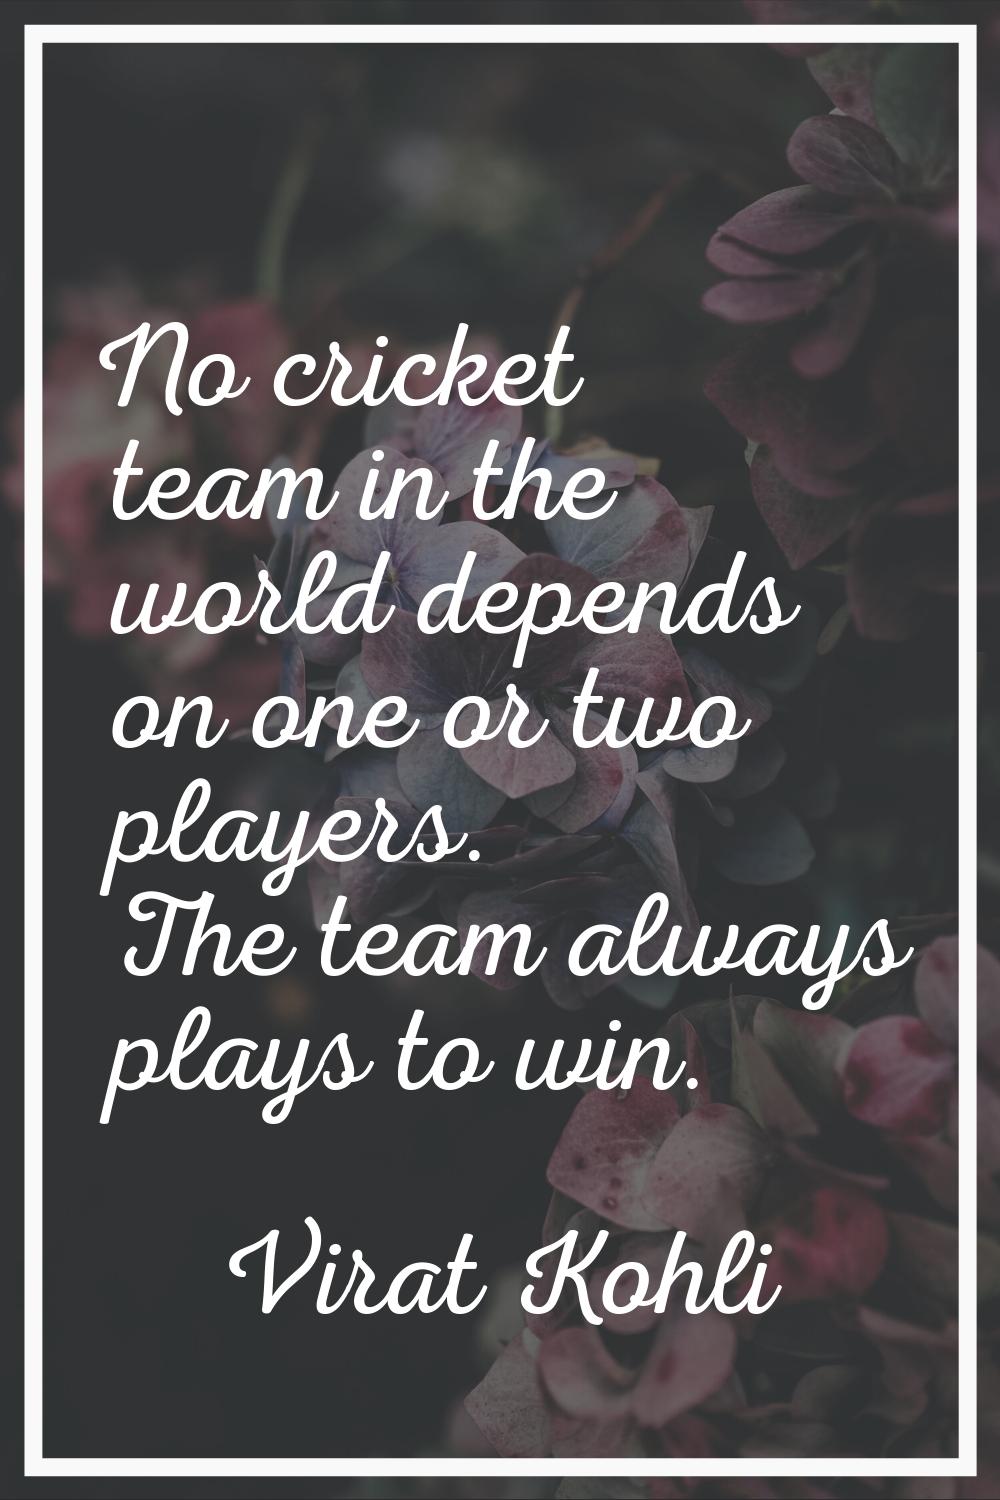 No cricket team in the world depends on one or two players. The team always plays to win.